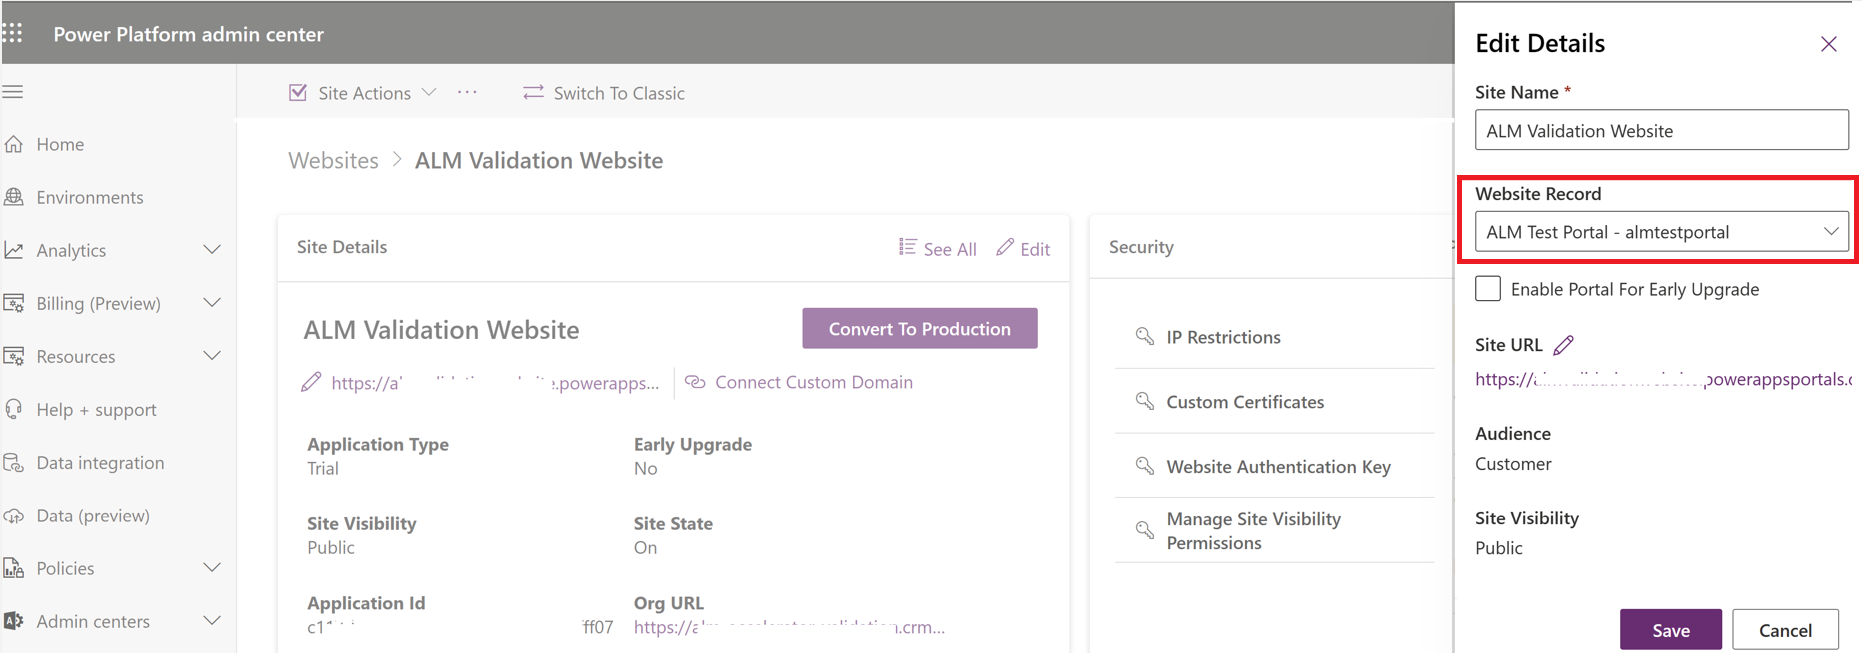 Screenshot of updating the details of a Power Pages website in the Power Platform admin center.